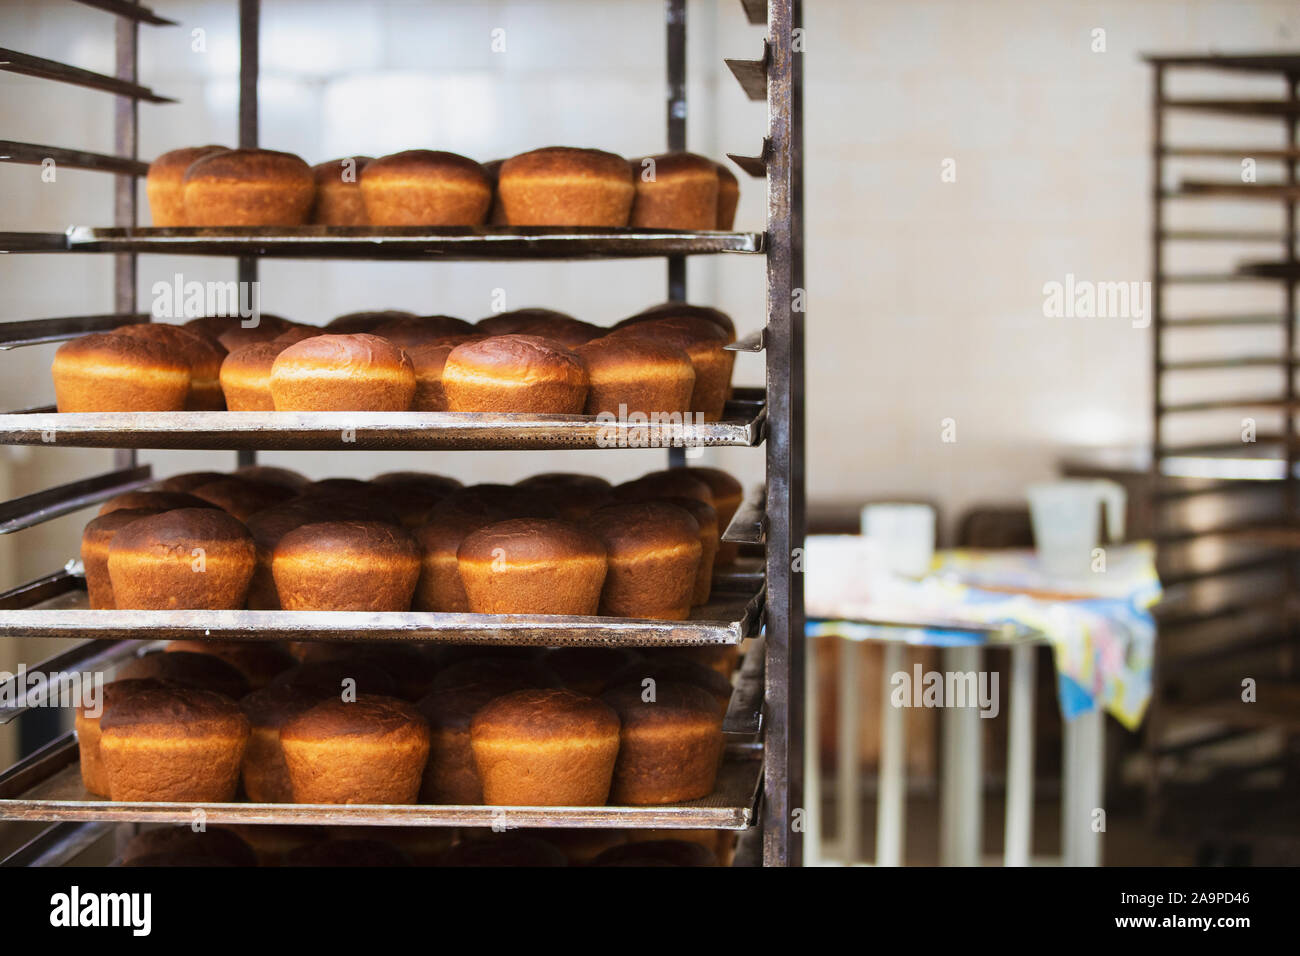 https://c8.alamy.com/comp/2A9PD46/industrial-production-of-bread-lots-of-baked-goods-on-pallets-freshly-baked-bun-bakery-2A9PD46.jpg